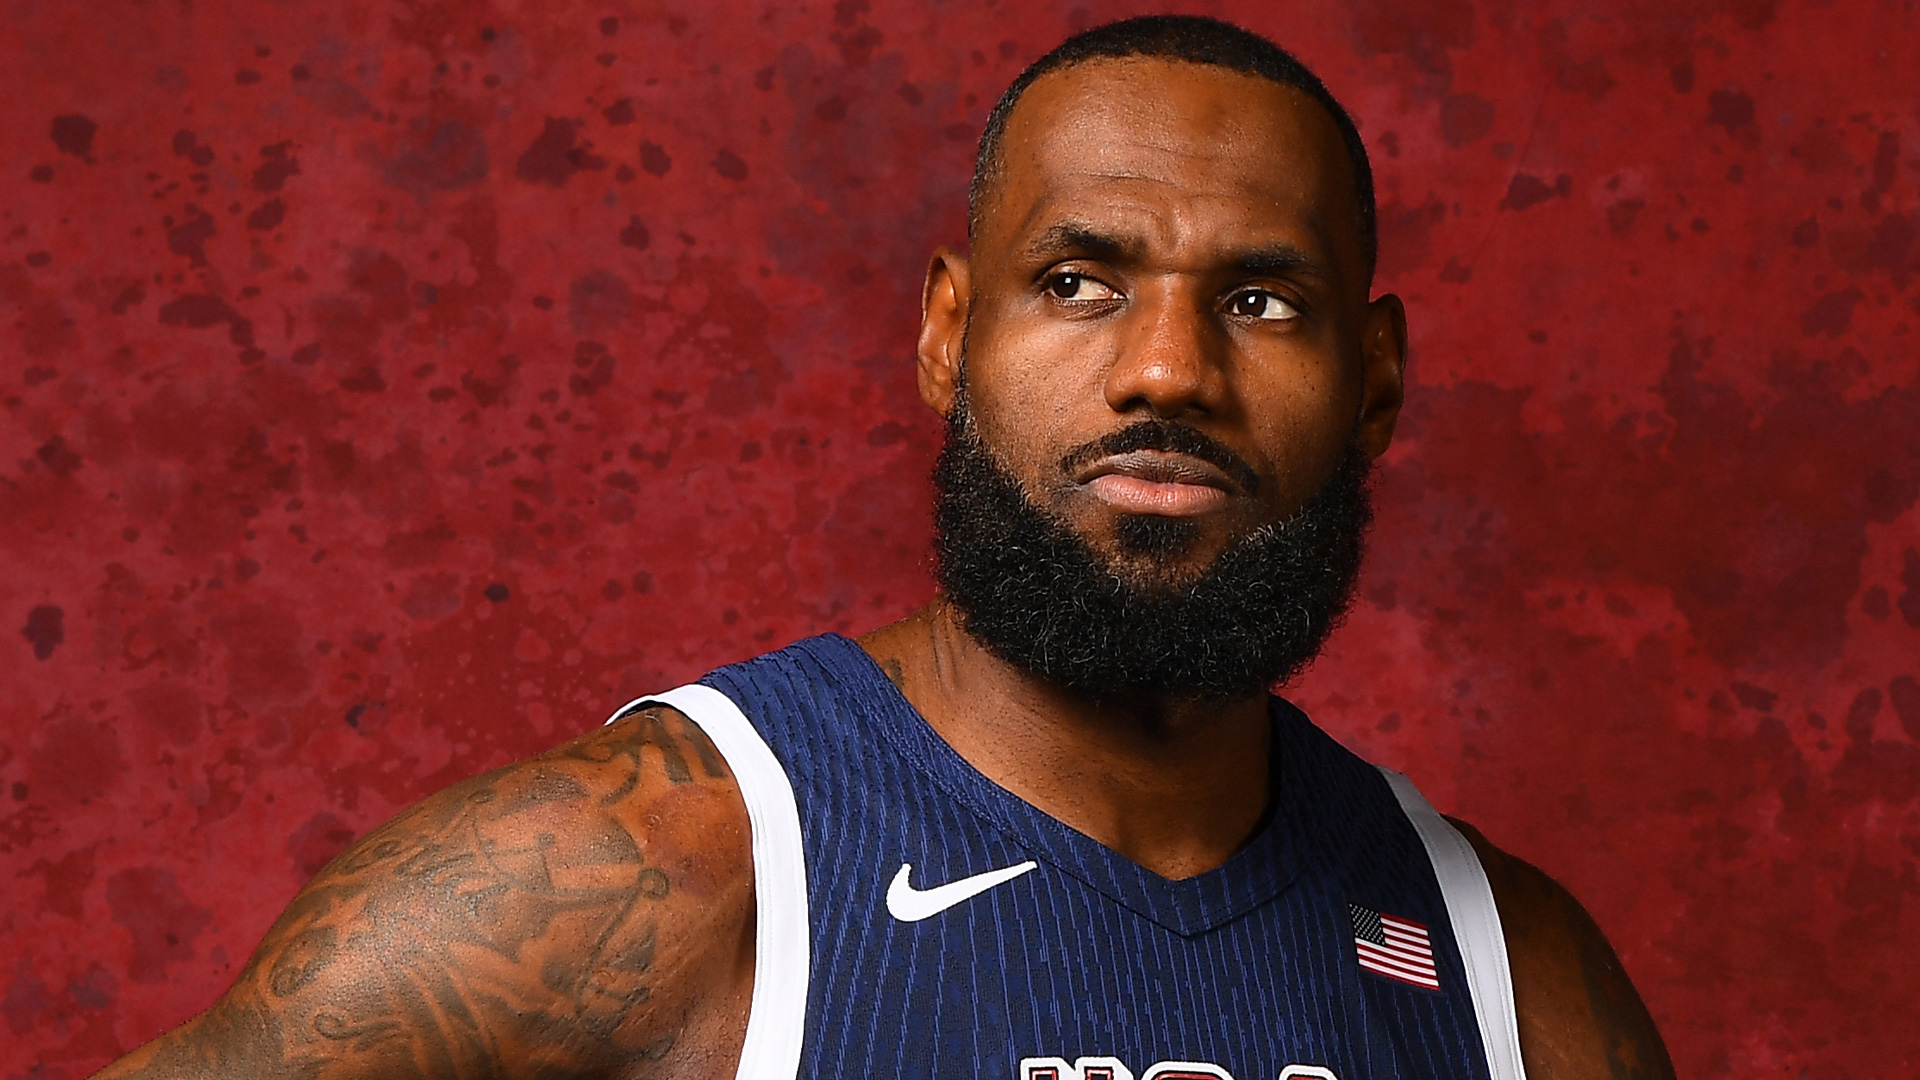 LeBron James’ new career venture after NBA retirement revealed as LA Lakers star looks to move into new industry [Video]